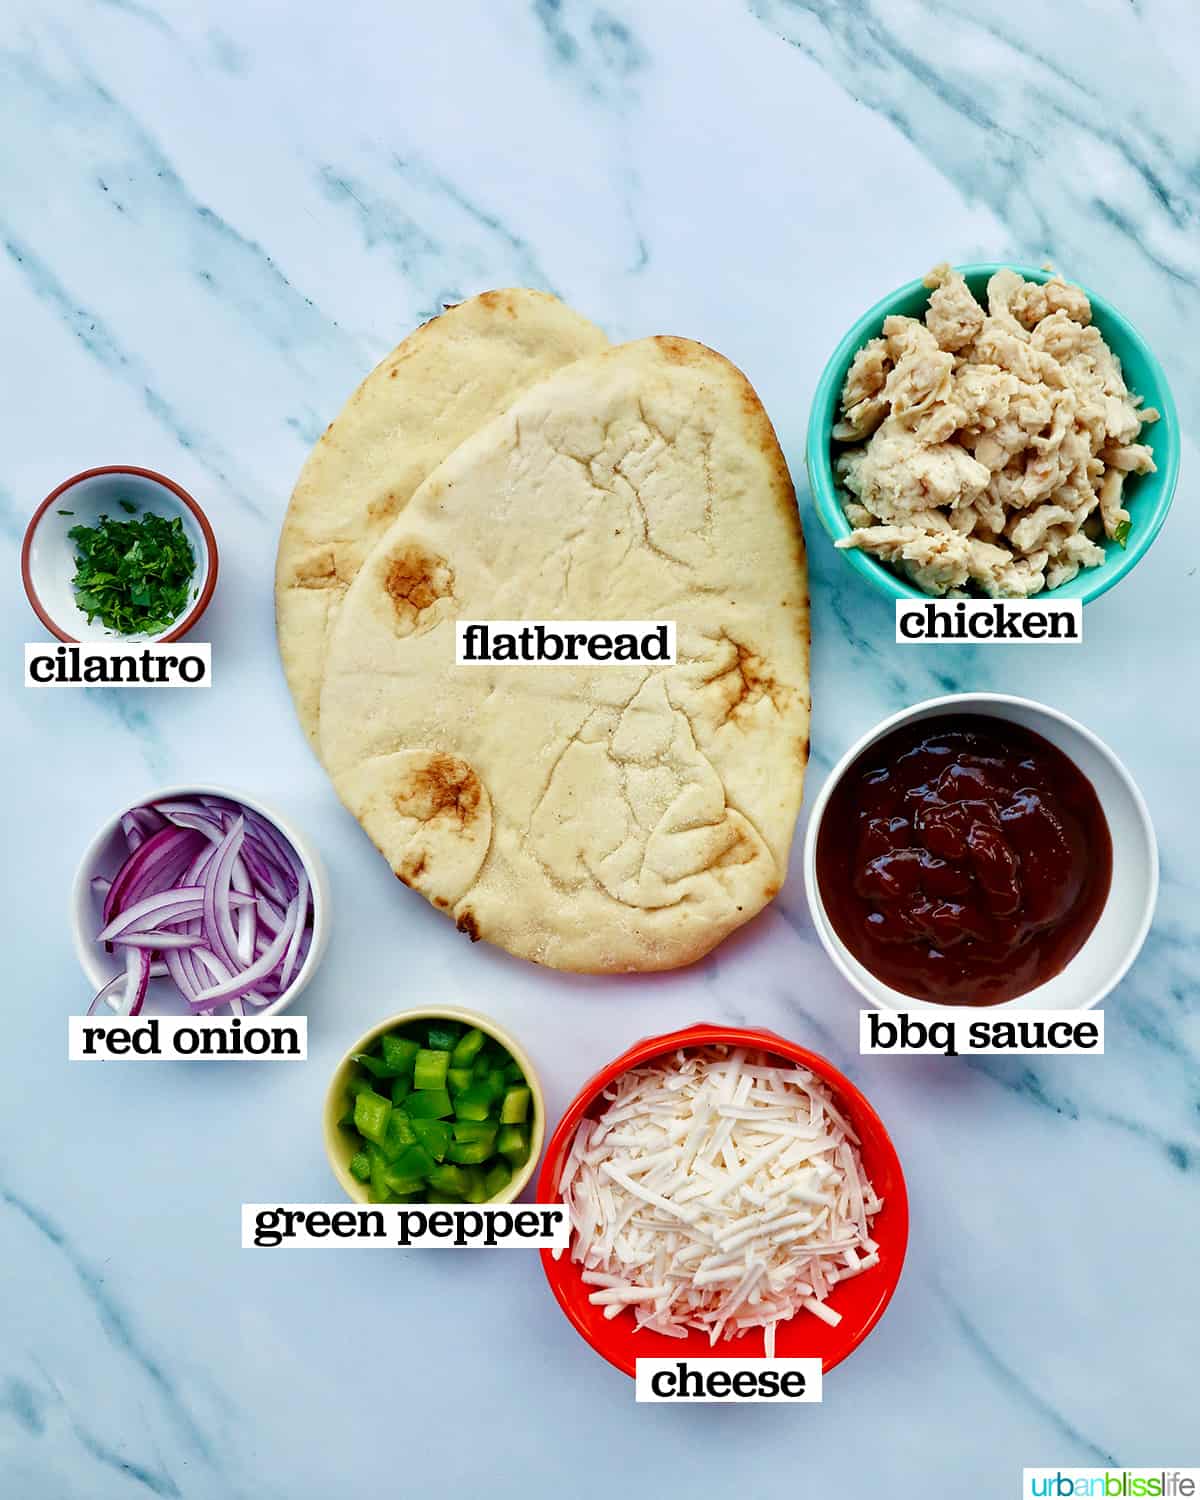 ingredients to make barbecue chicken flatbread pizza on marble.